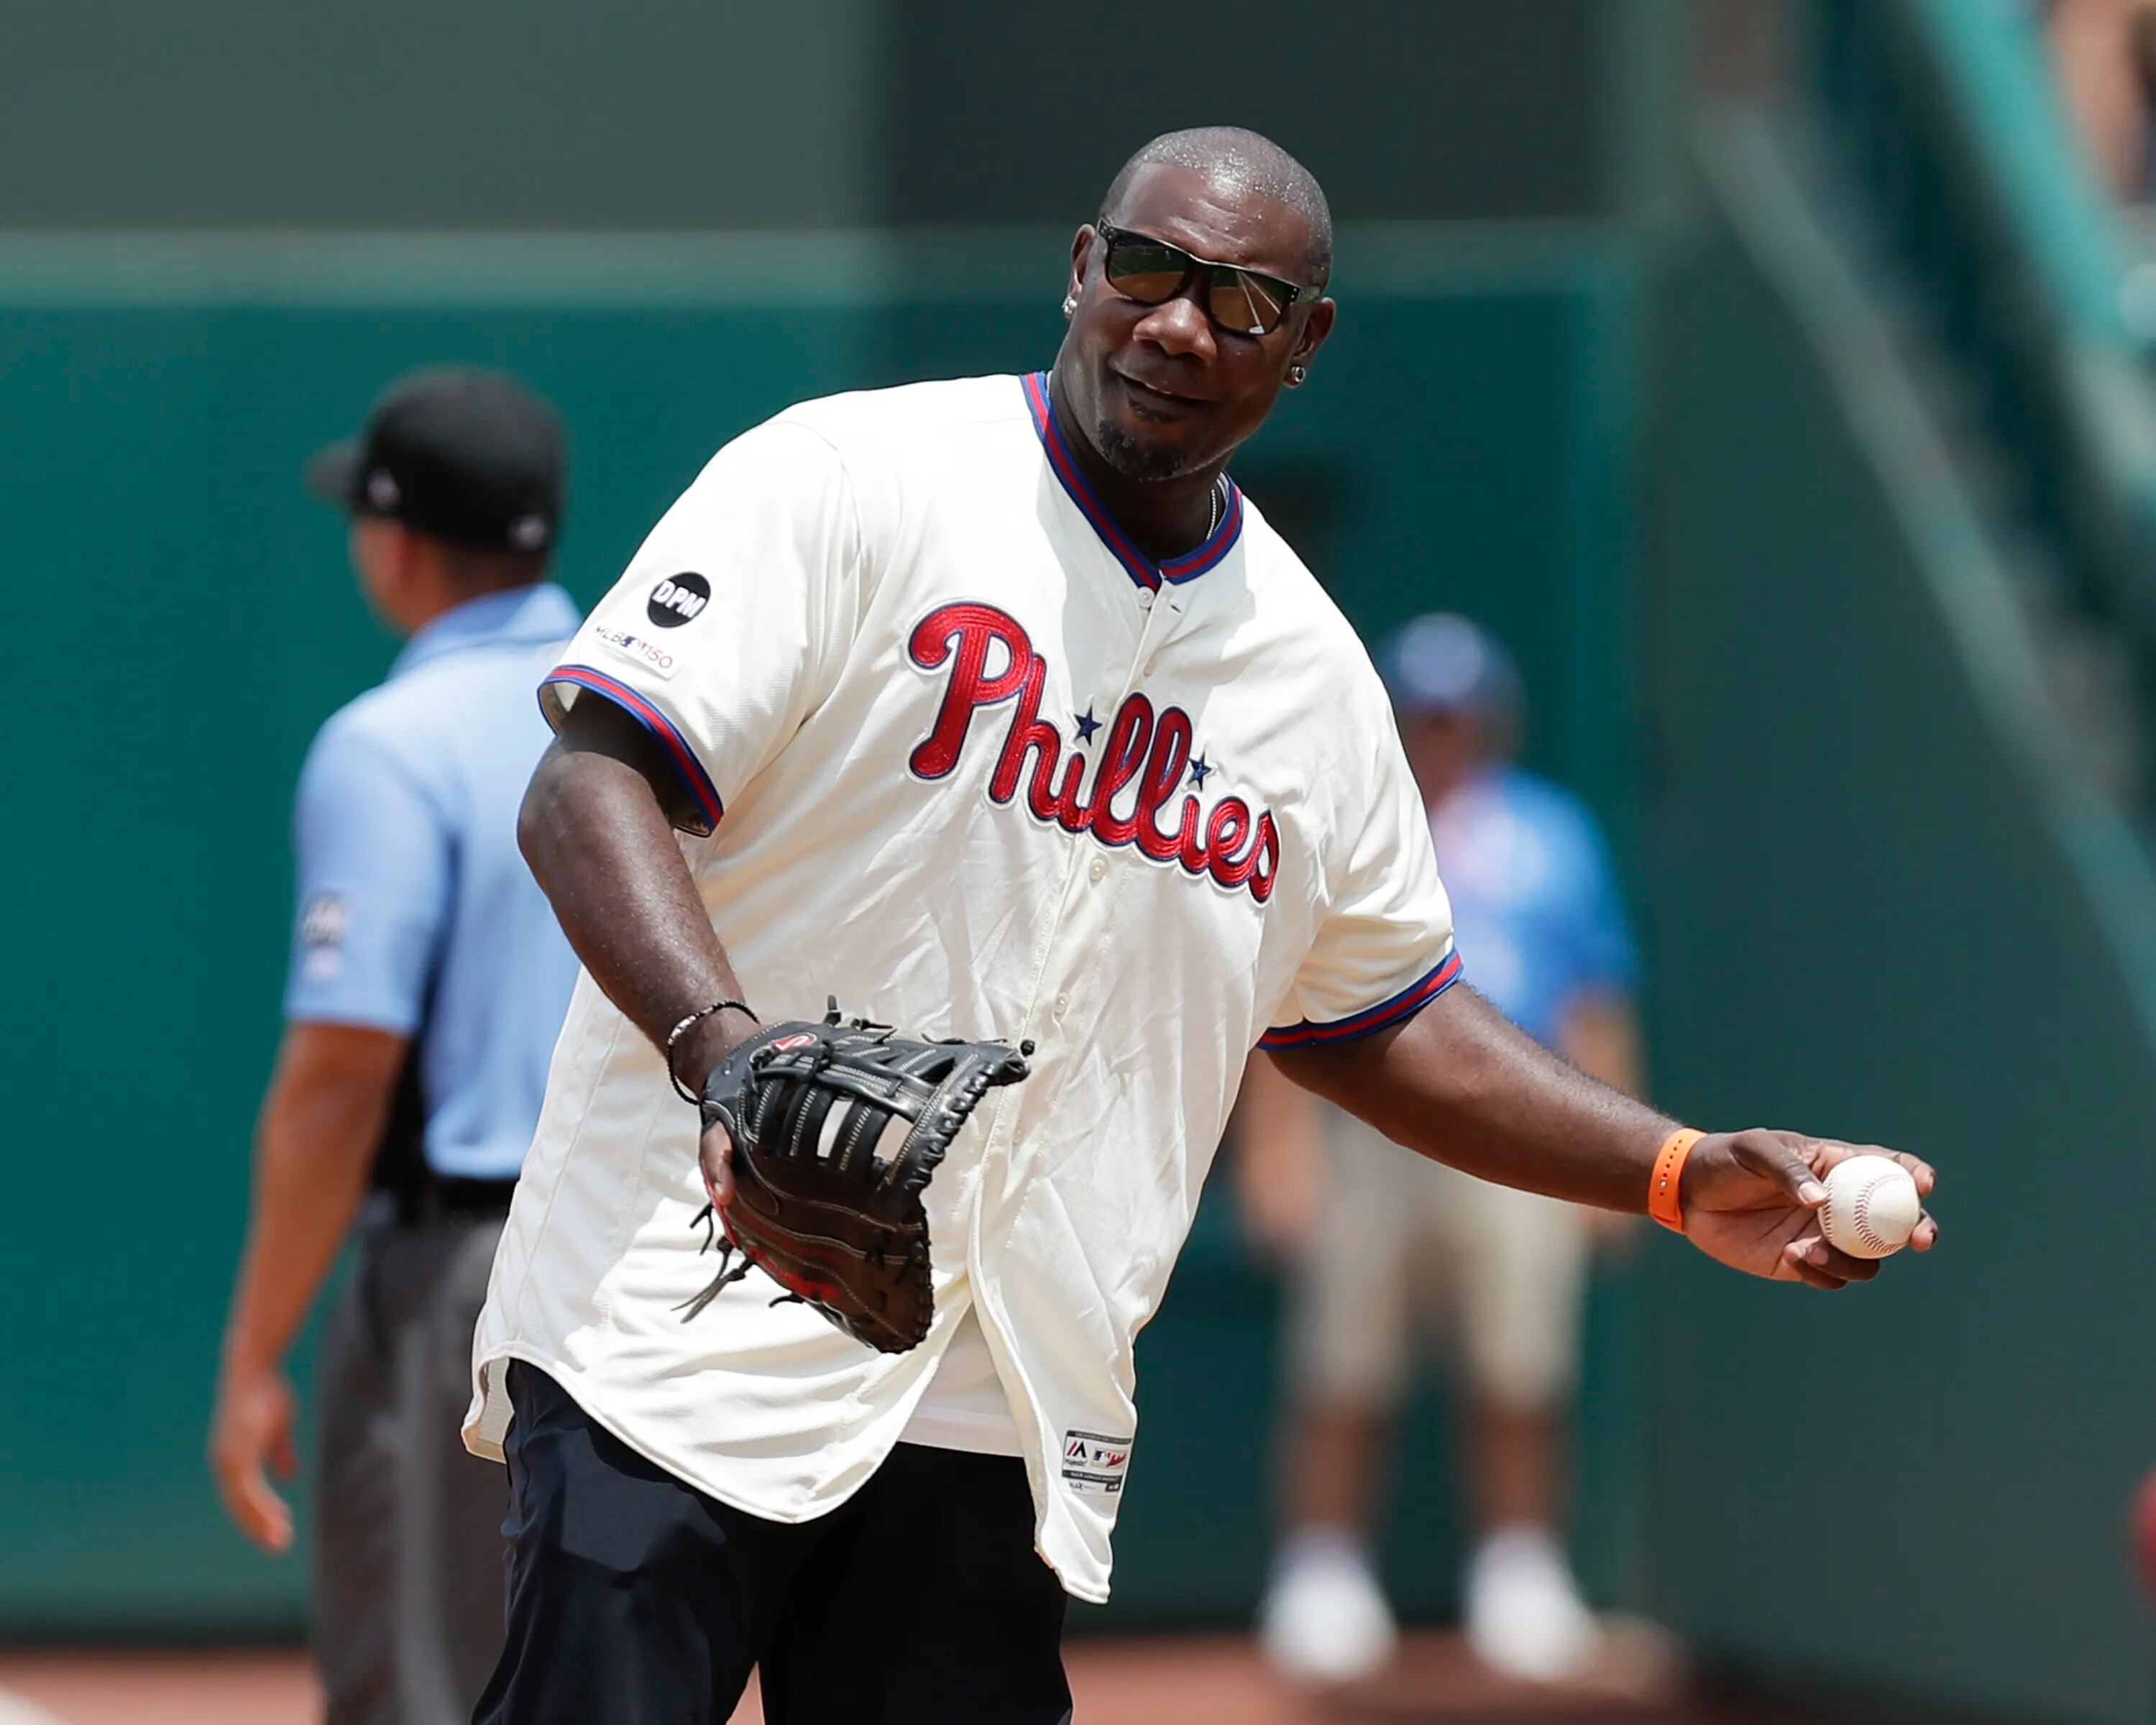 Ryan Howard earned the right to be wrong about himself – The